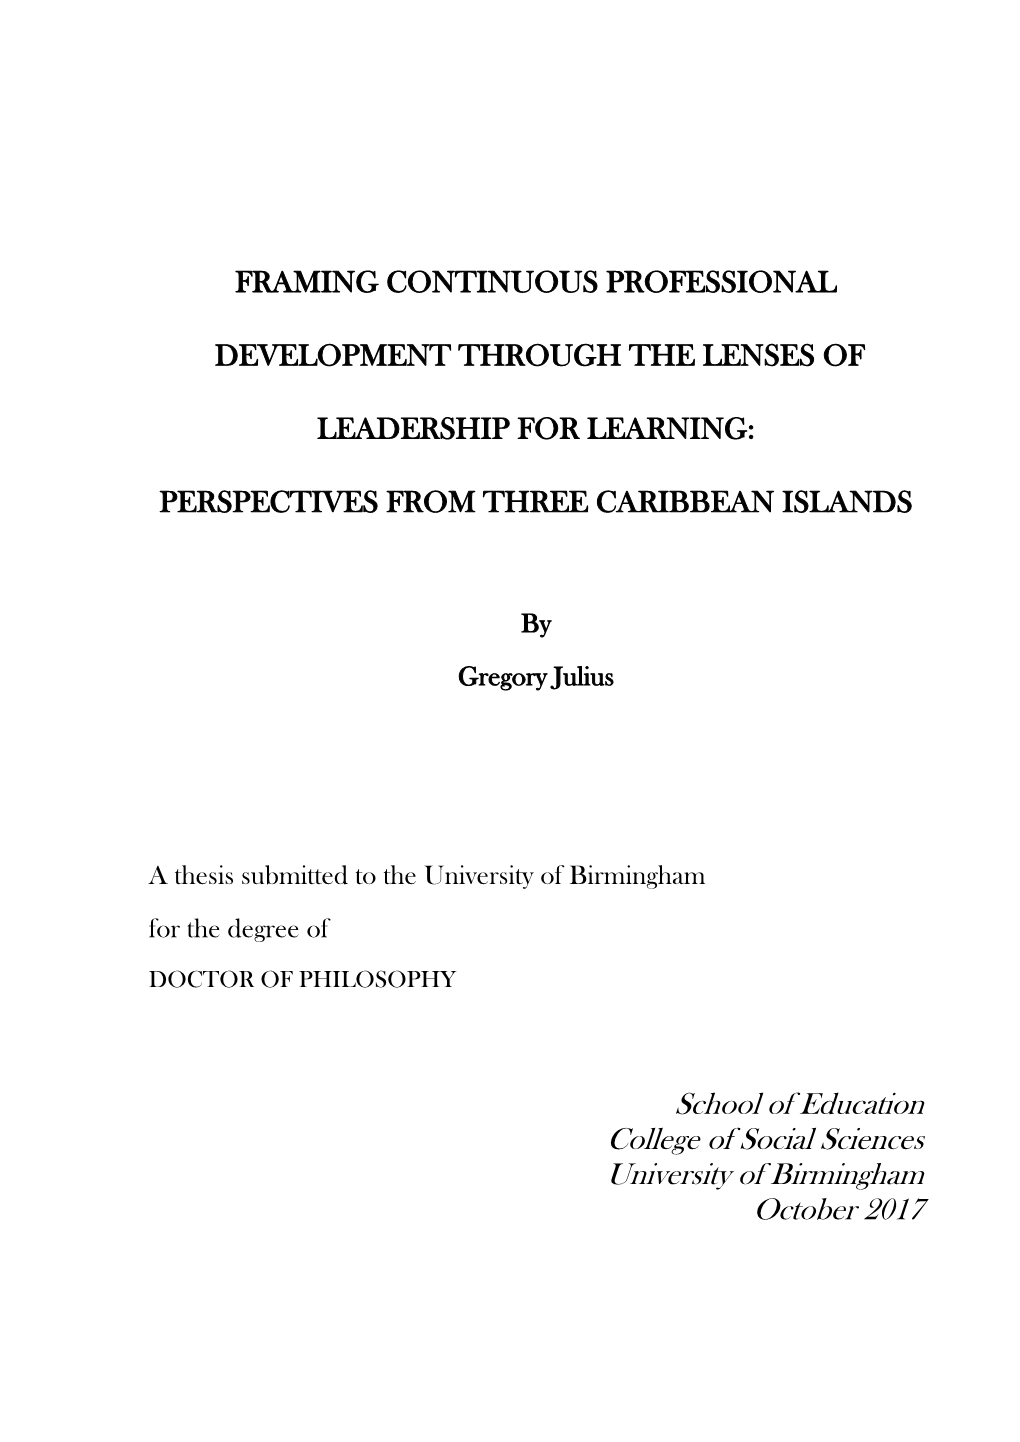 Framing Continuous Professional Development Through the Lenses of Leadership for Learning: Perspectives from Three Caribbean